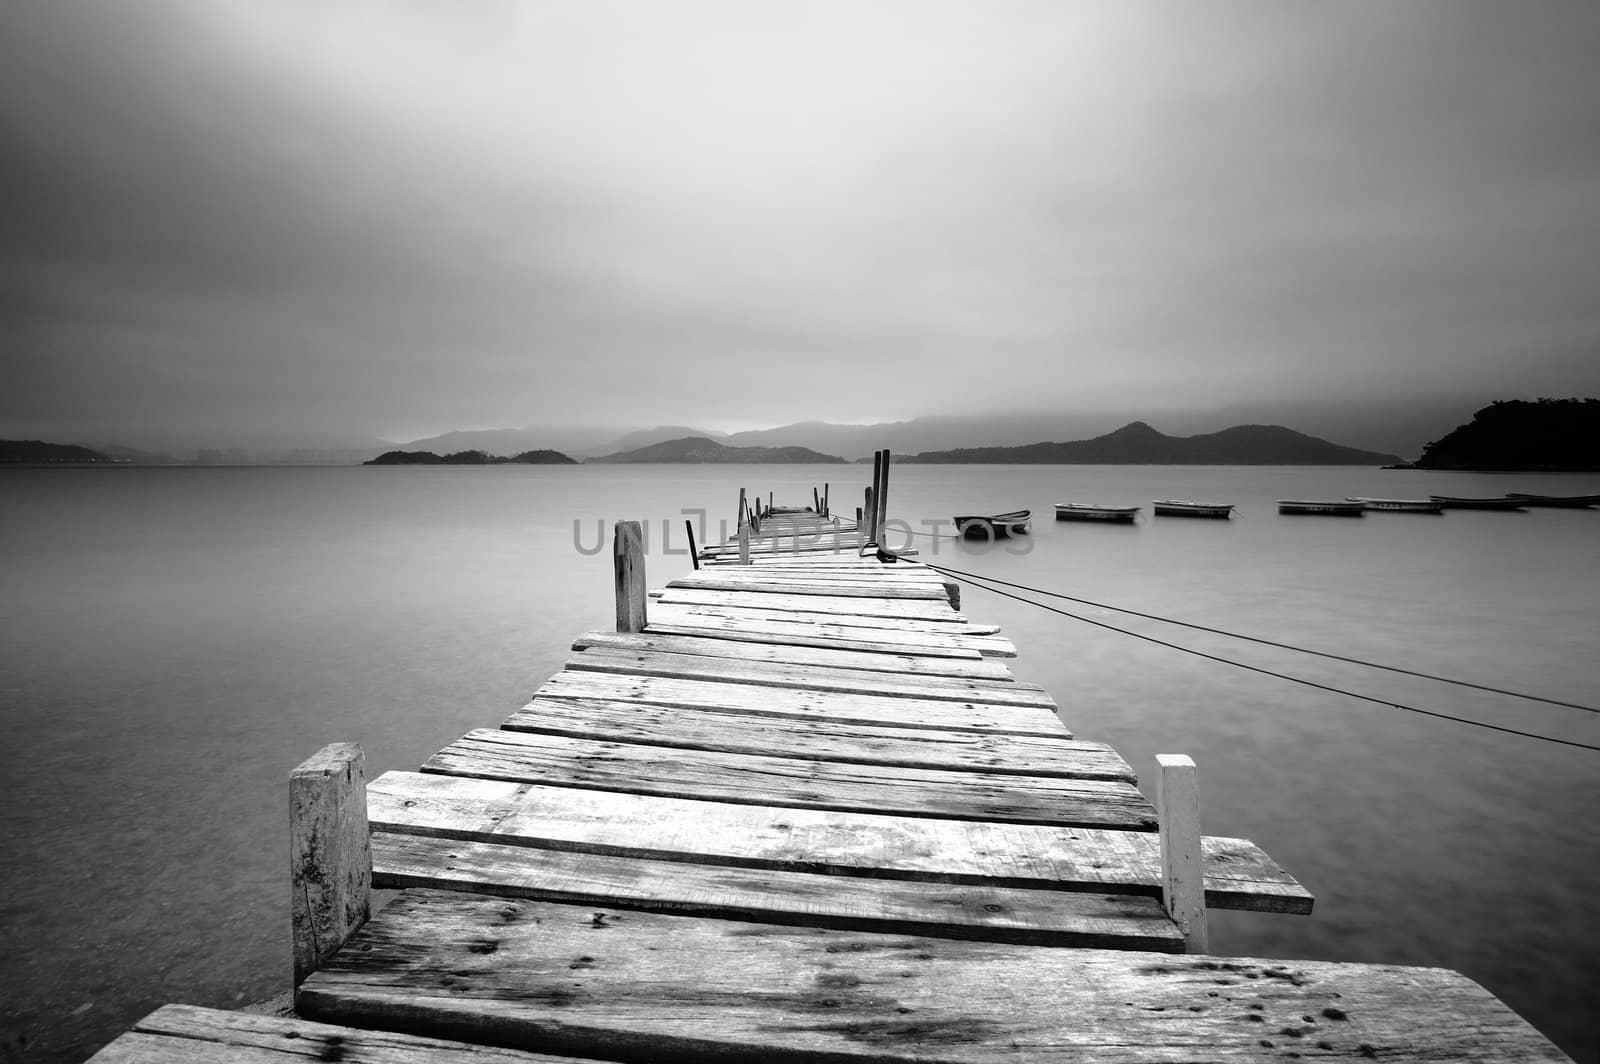 Looking over a pier and boats, black and white by leungchopan